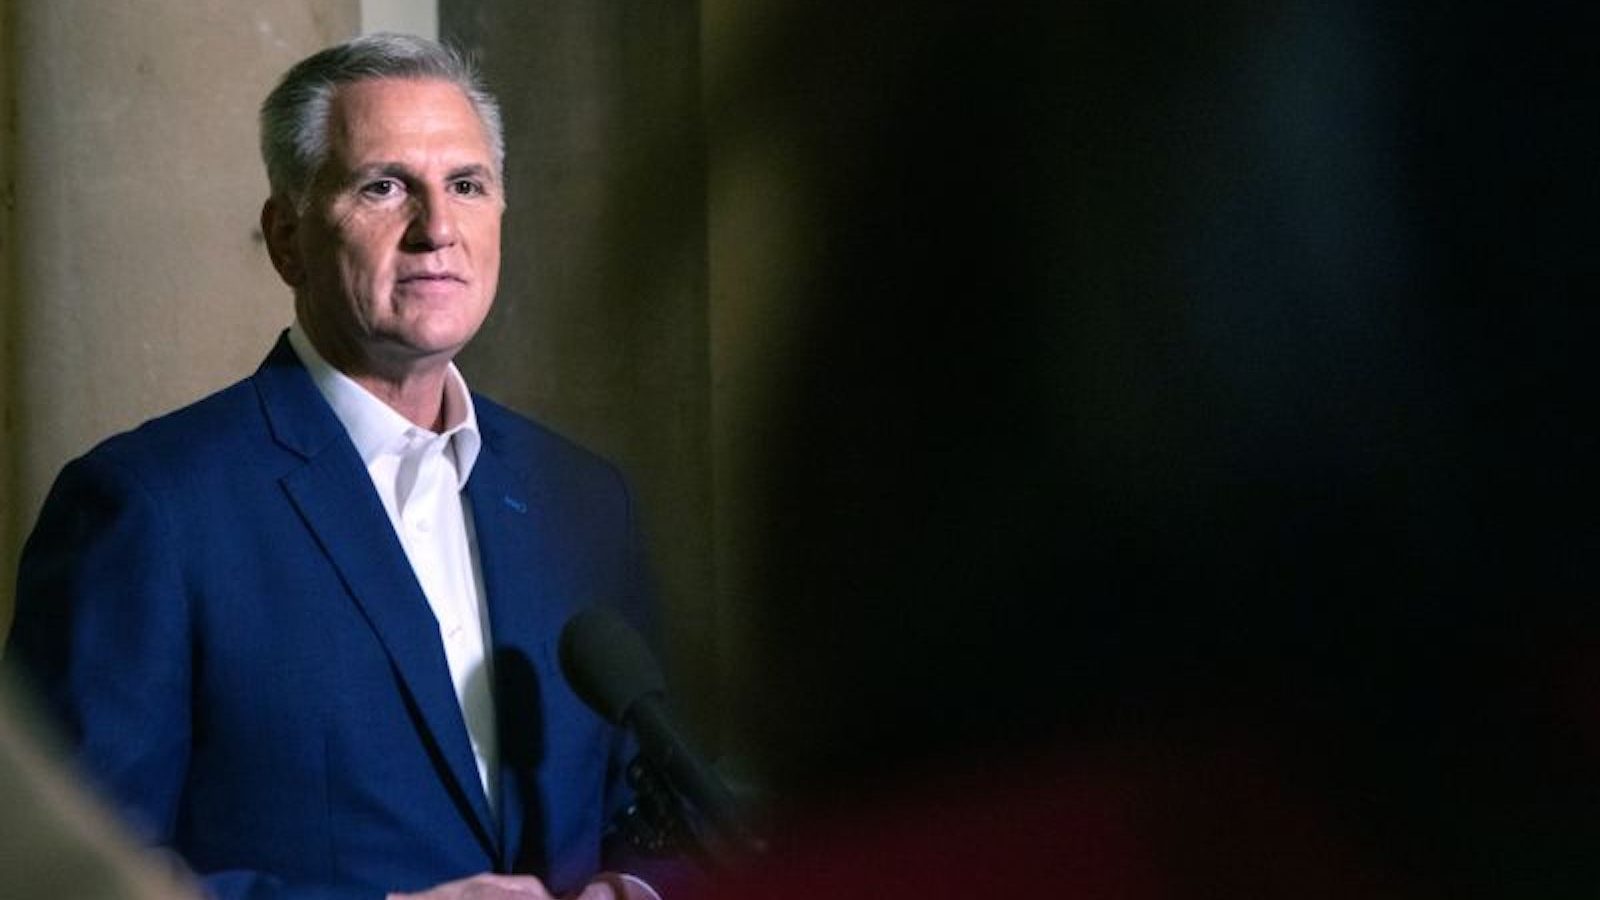 ‘They’re Wrong’: McCarthy Responds To His Critics As He Faces Backlash From Hardline Republicans